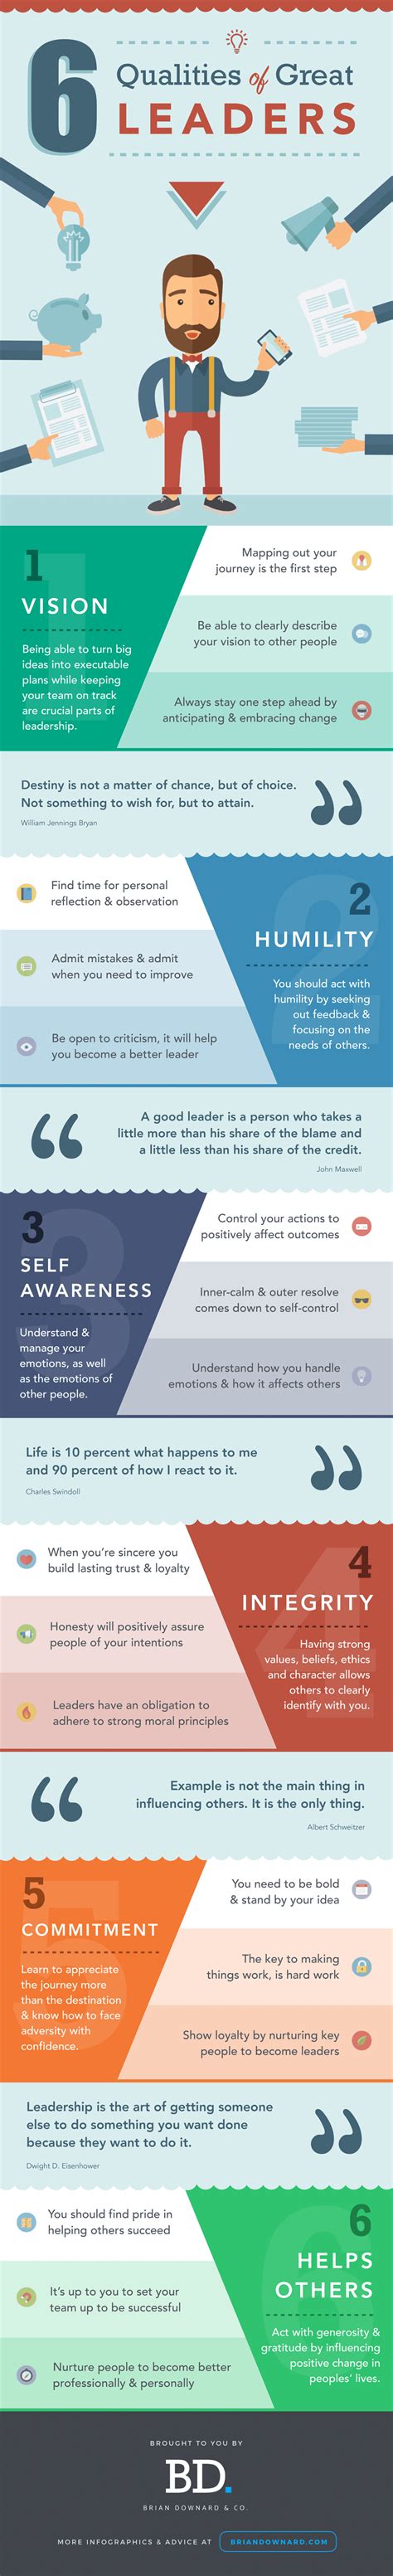 Leadership skills are highly sought by employers. Infographic: 6 Qualities of Great Leaders | Refresh Leadership